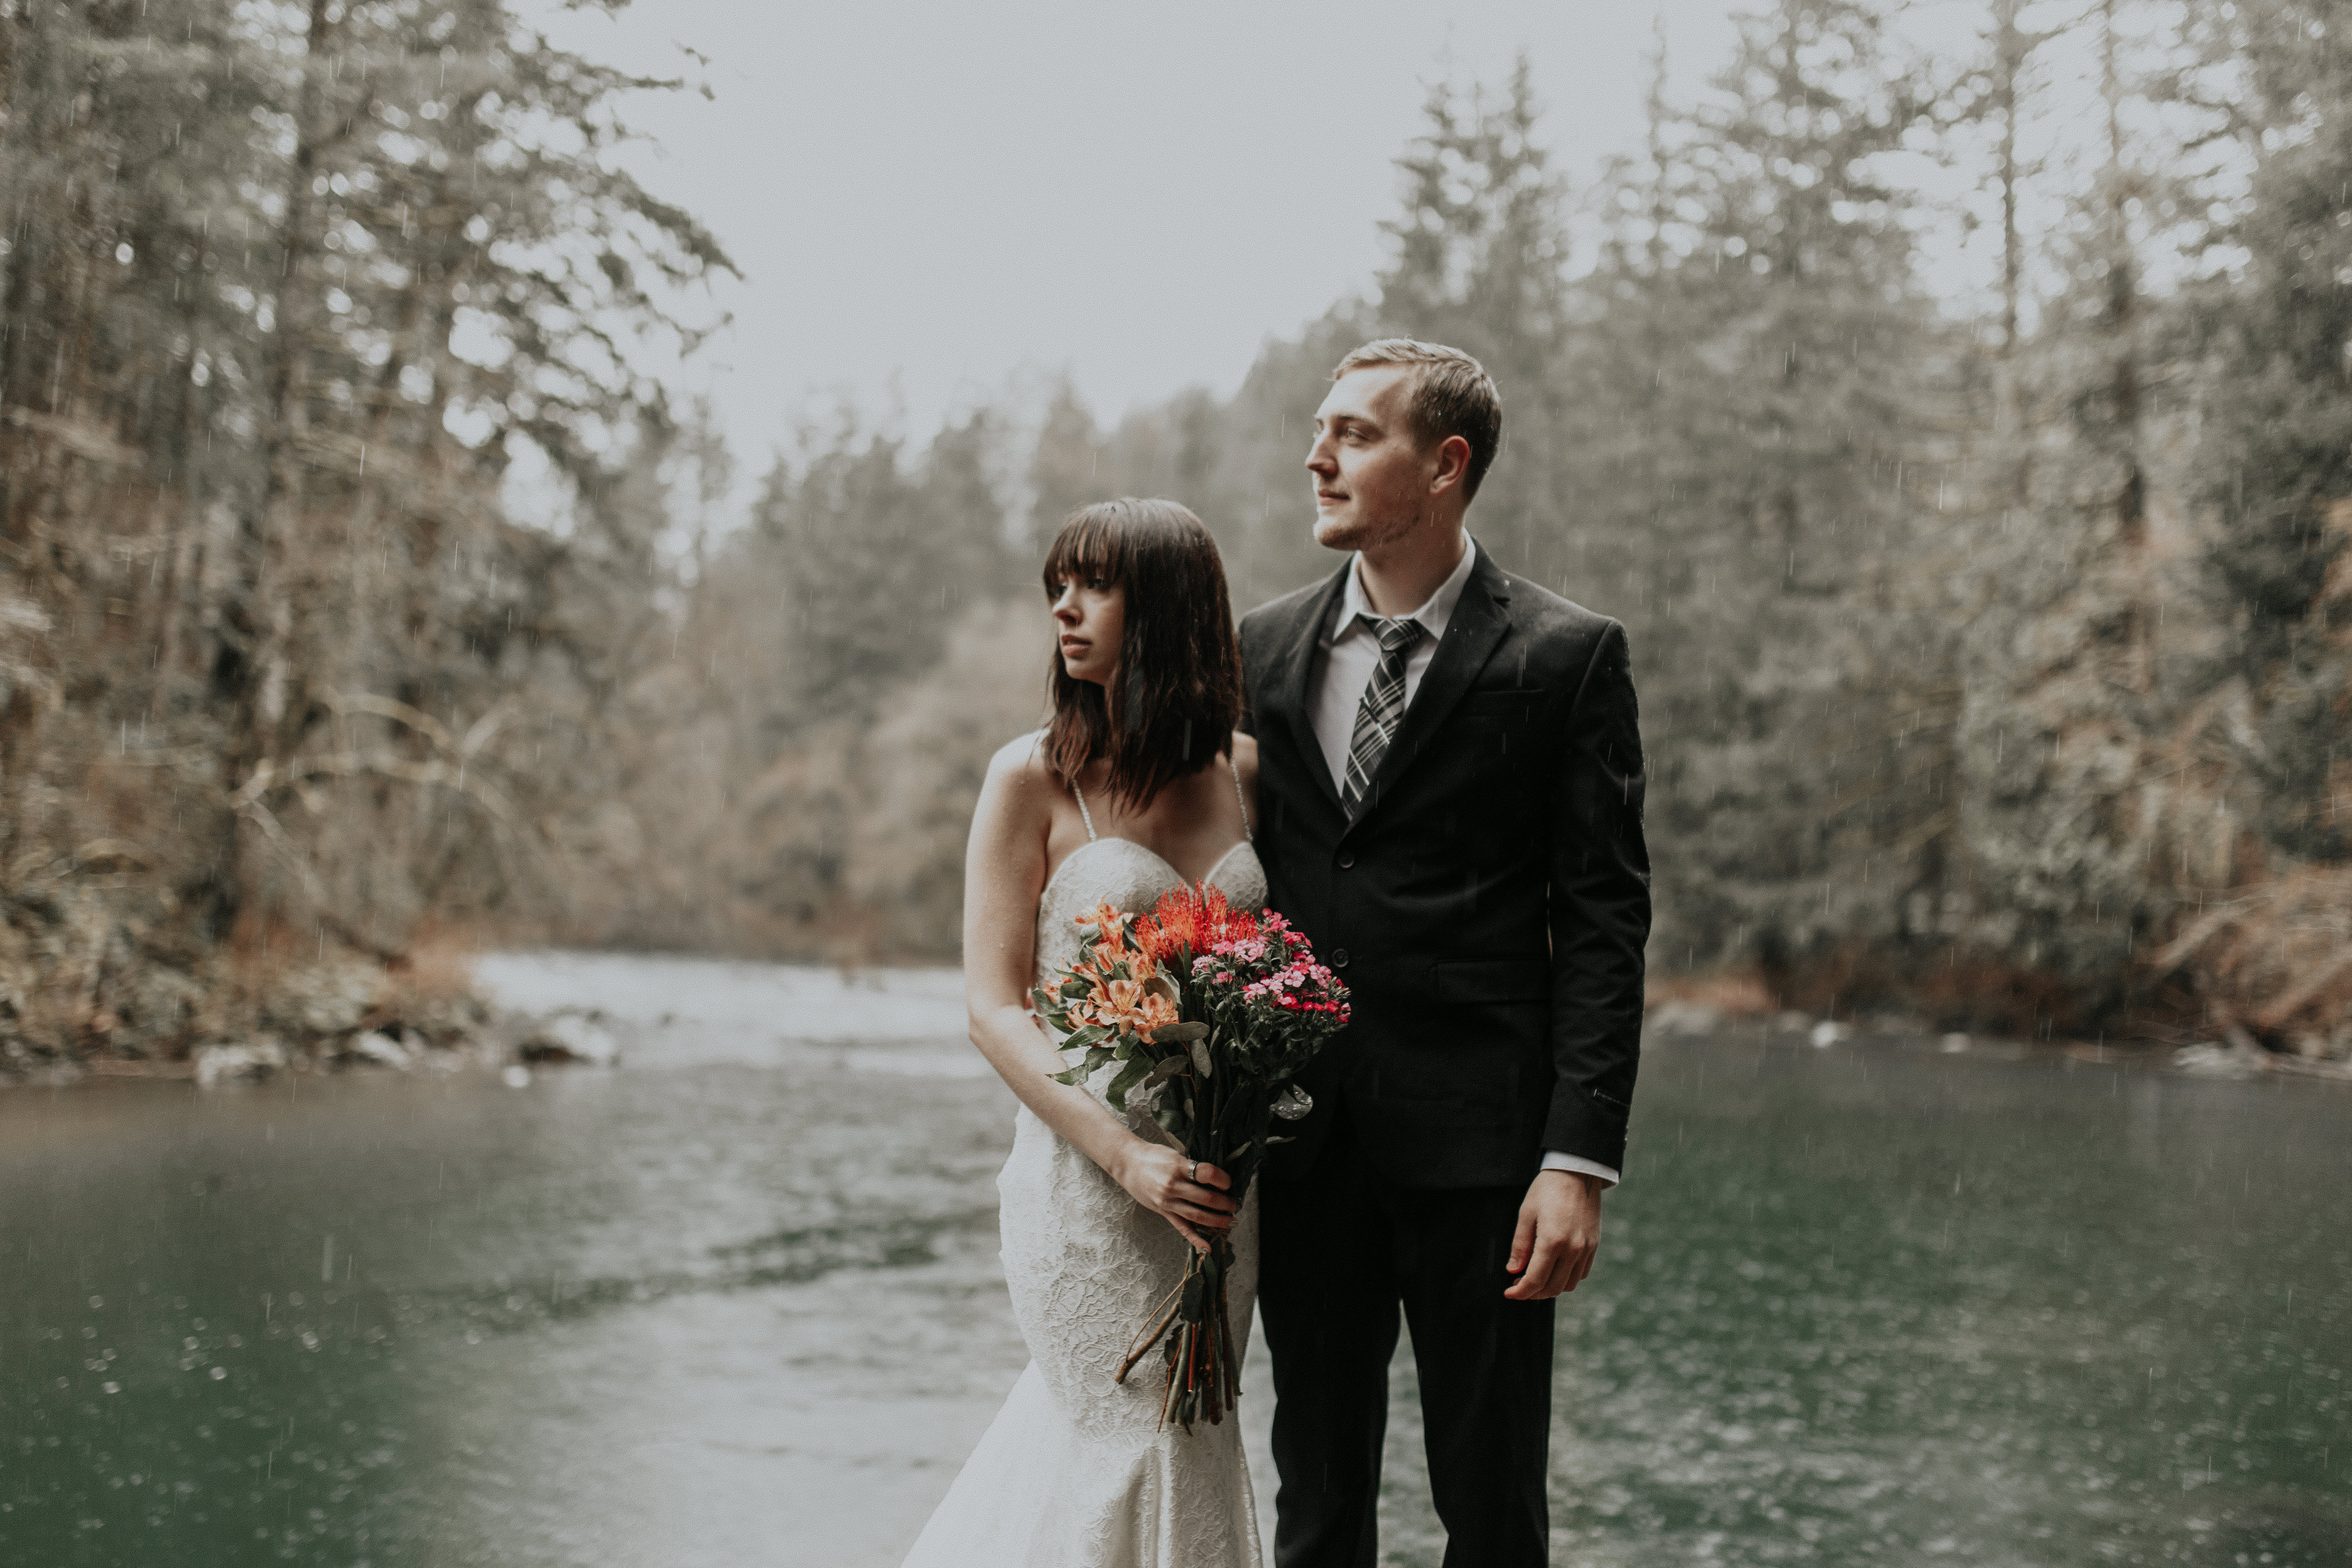 Paige and TJ near the Moulton Falls river for their intimate wedding in Washington state.